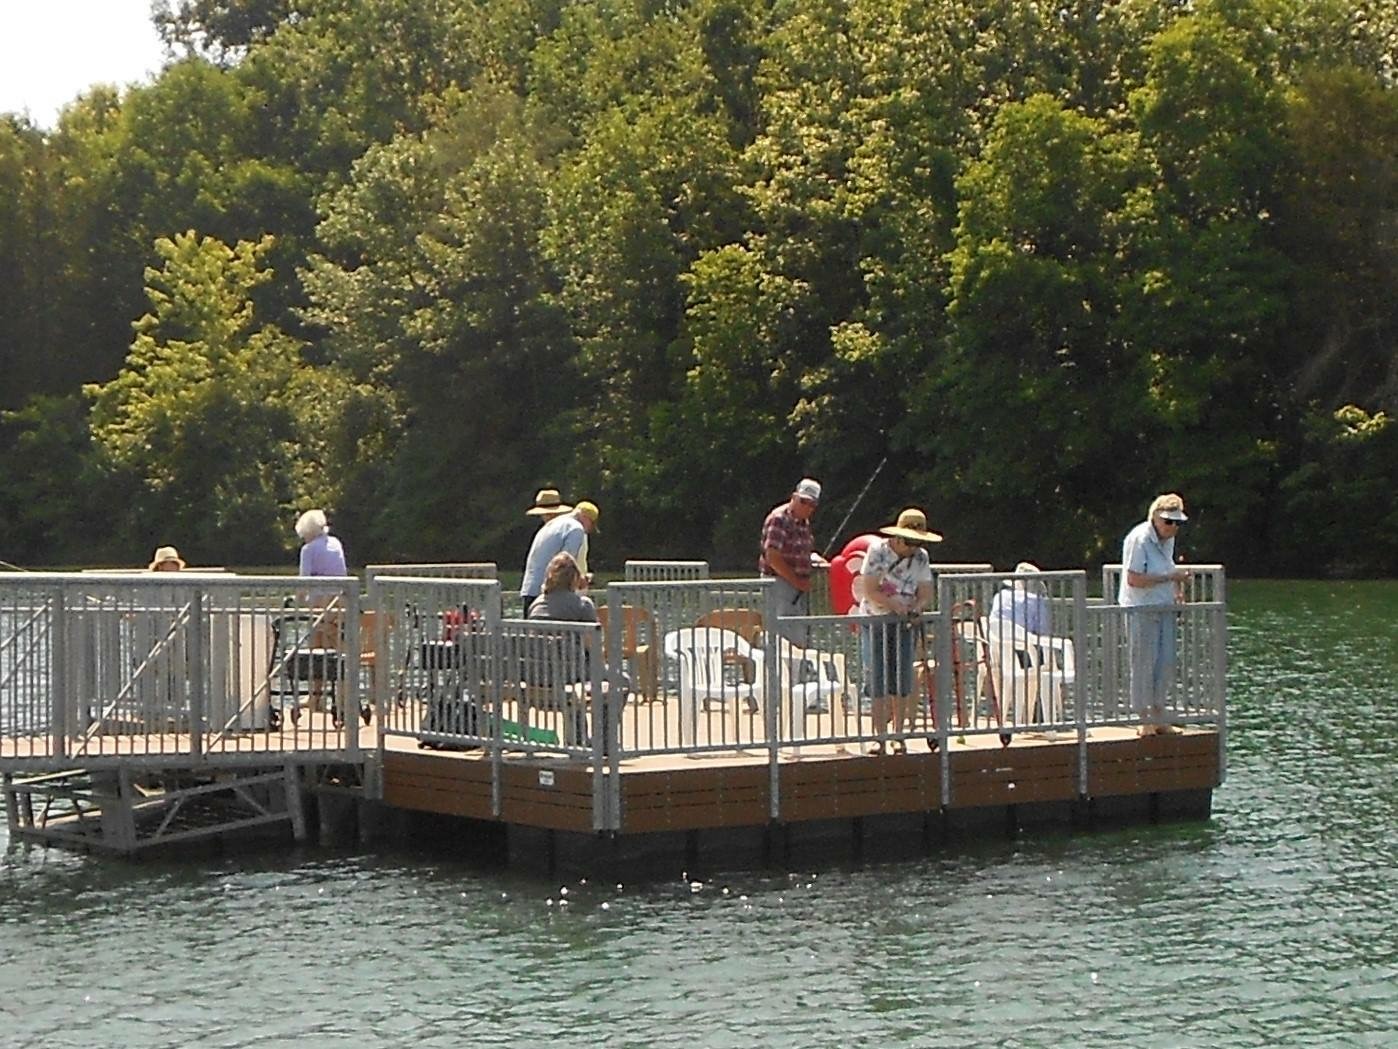 Waterloo has several fishing lakes within our parks. Lakeview Park also has an accessible fishing pier.